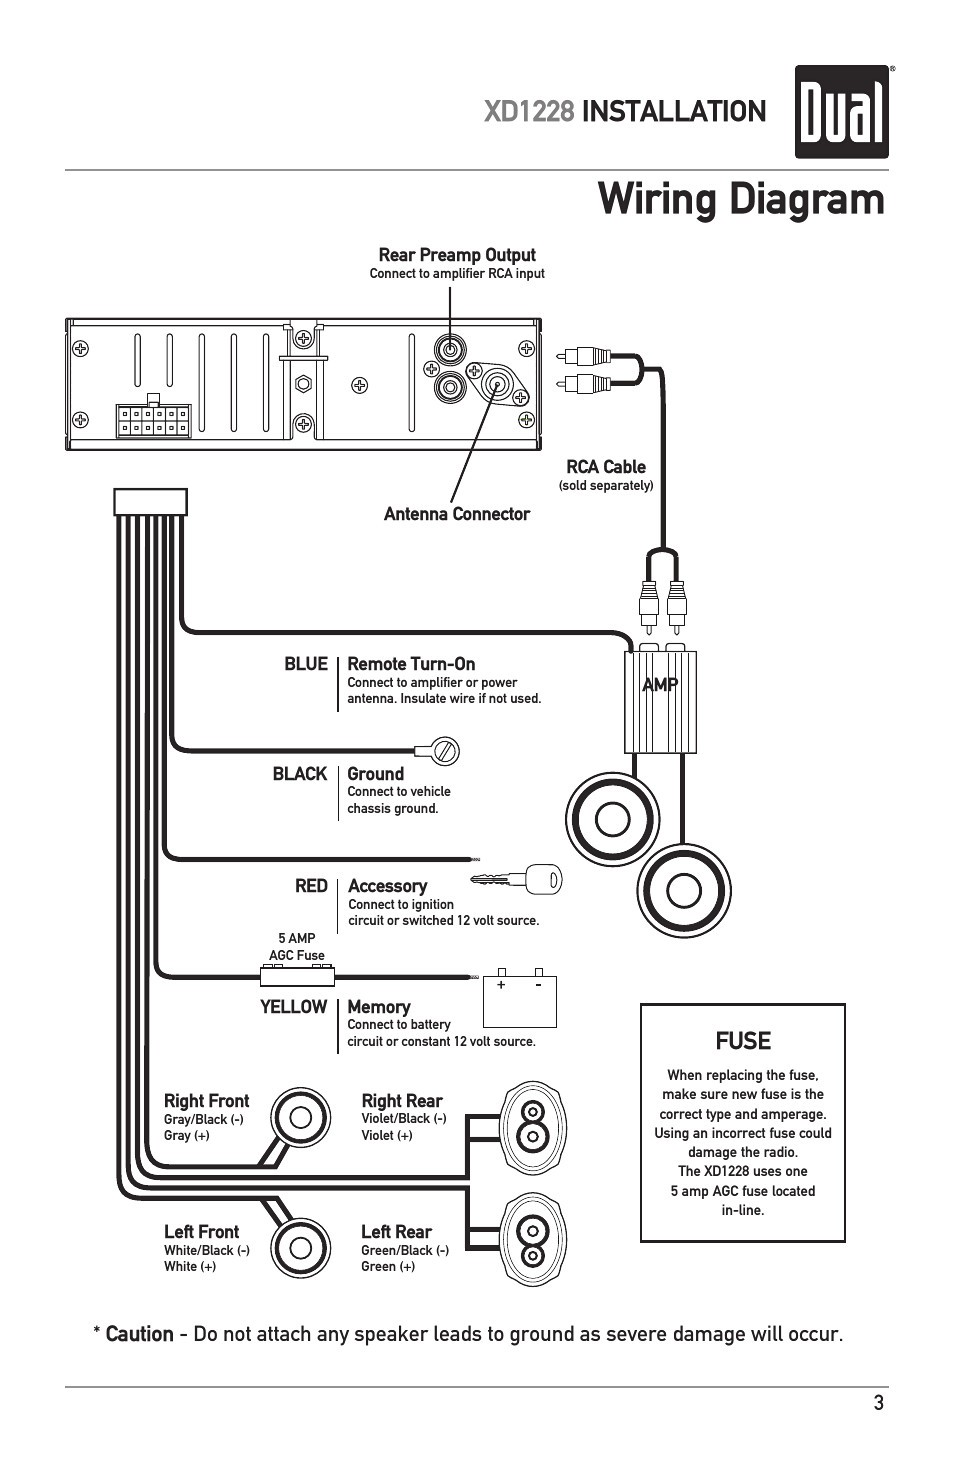 Dual Stereo Wiring Harness Diagram from mainetreasurechest.com